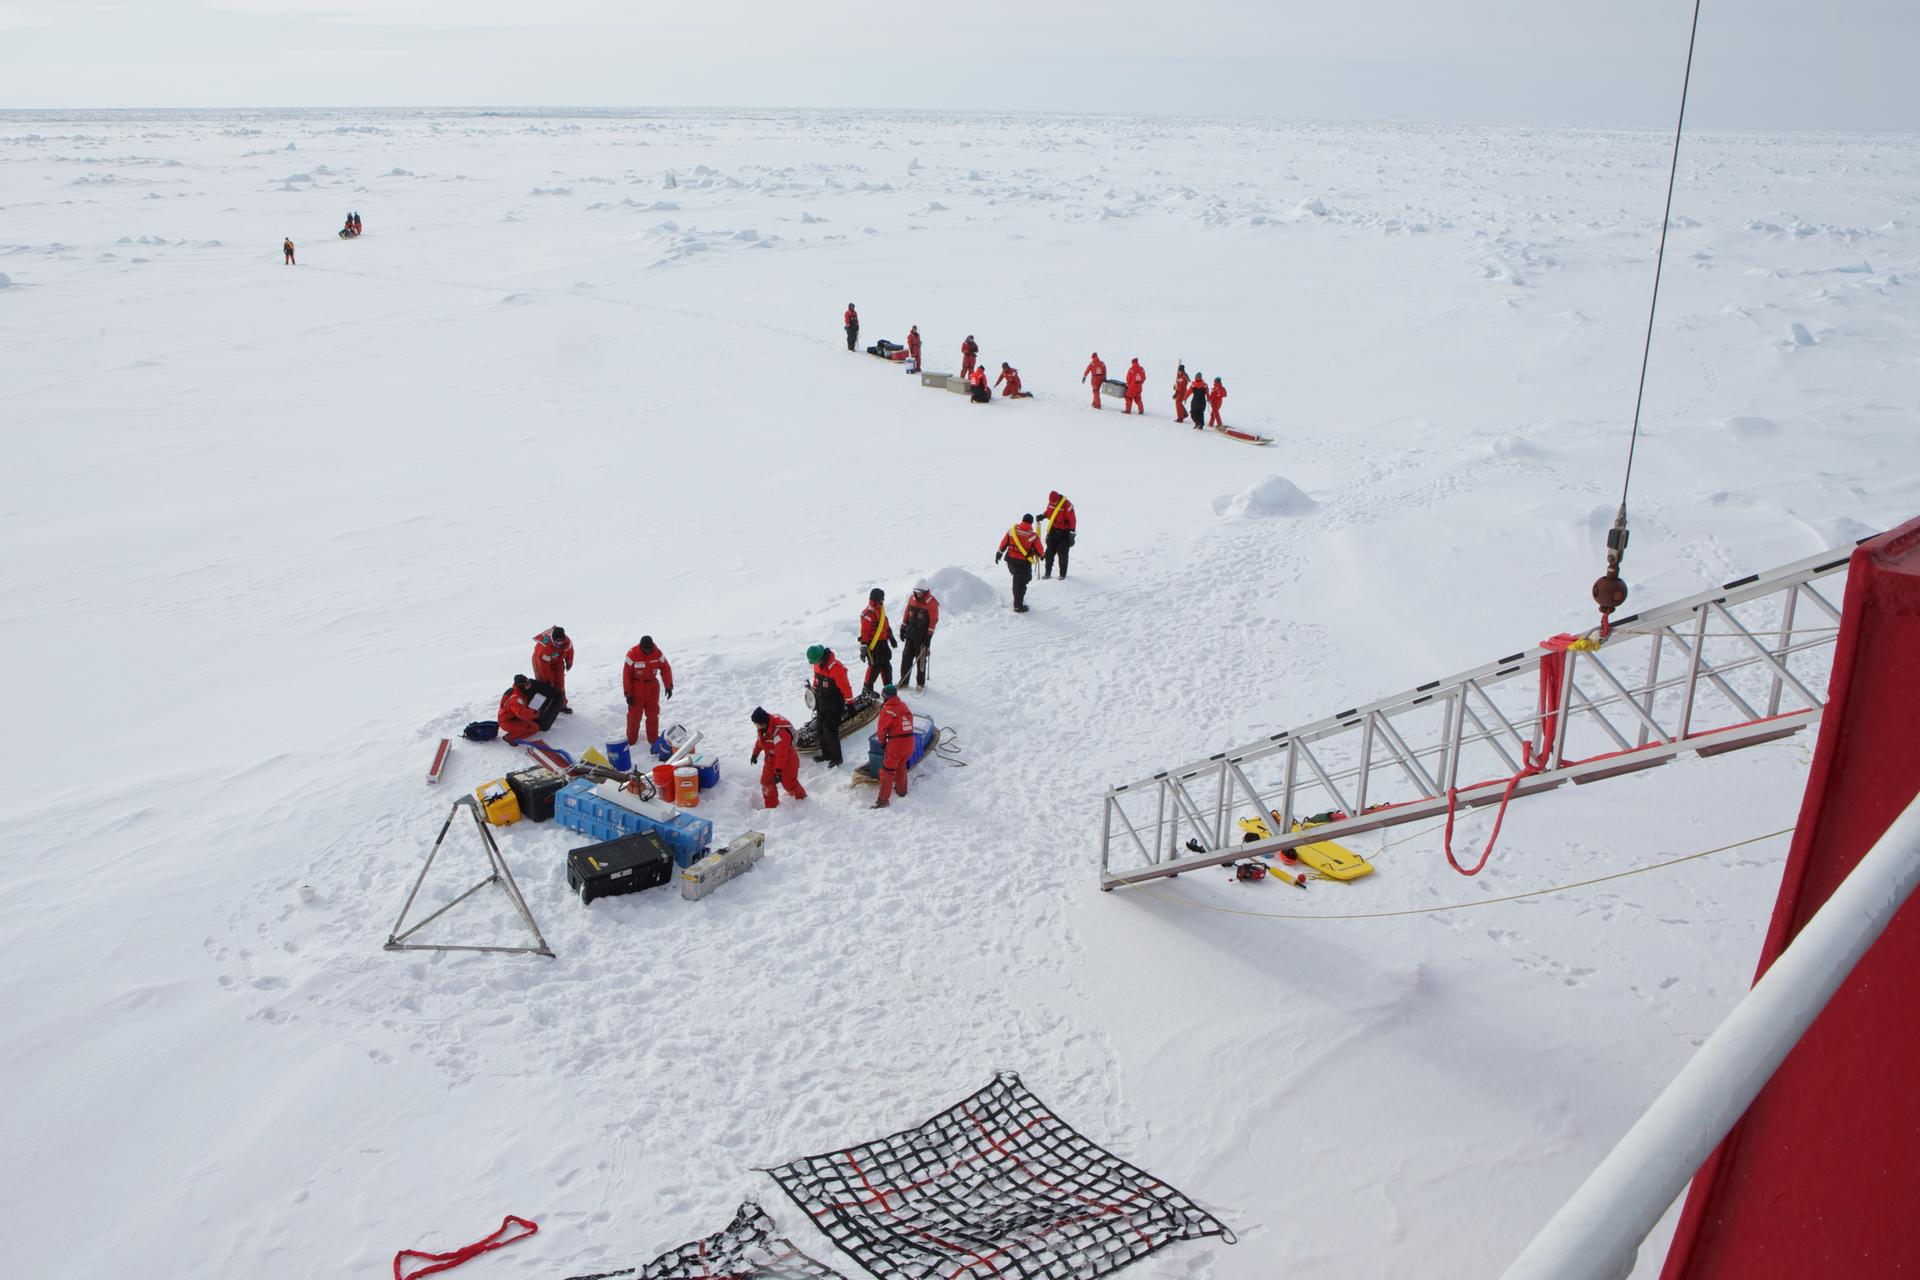 Crew and scientists traveling on the U.S. Coast Guard icebreaker Healy unload equipment in the lee of the parked ship before hiking off to set up their research projects in undisturbed snow.